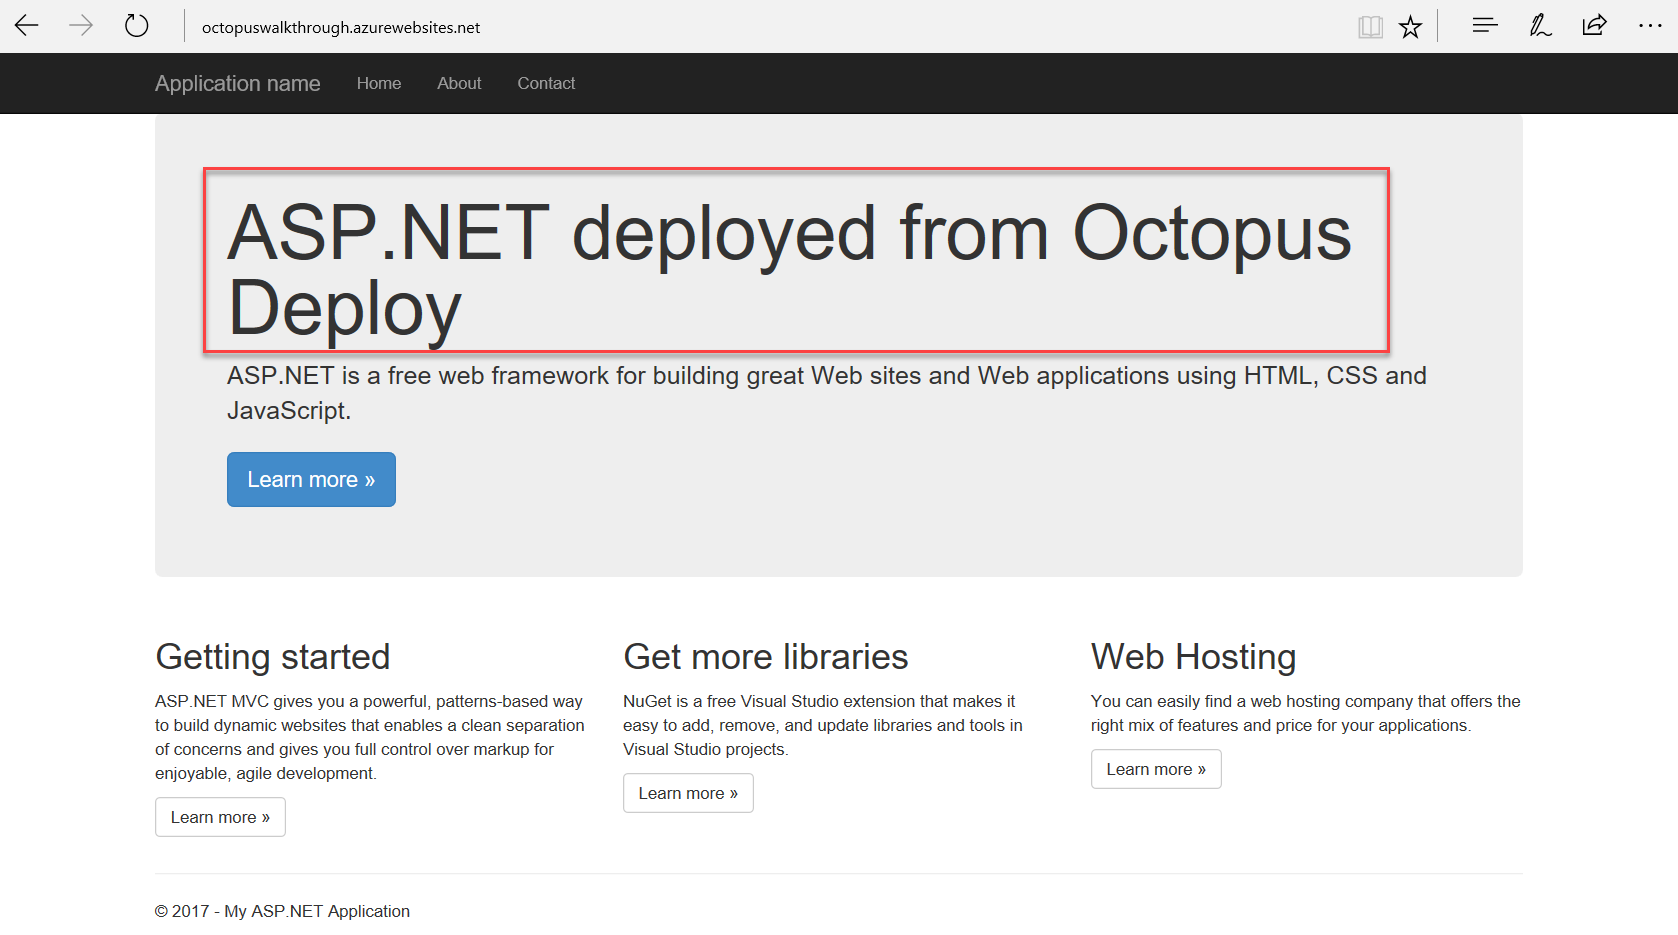 Screenshot of the ASP.NET deployed from Octopus Deploy message.